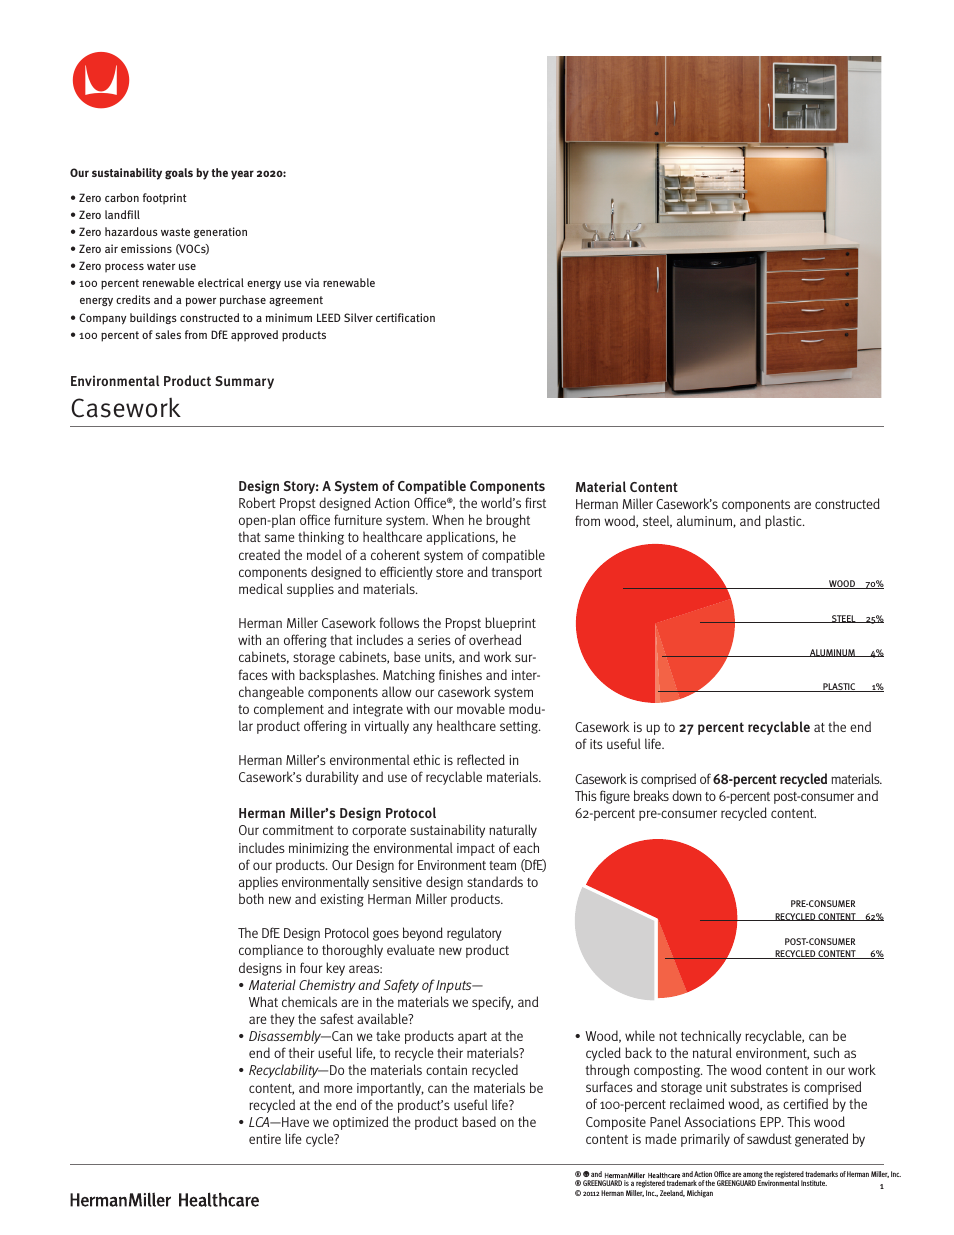 Casework - Environmental Product Summary